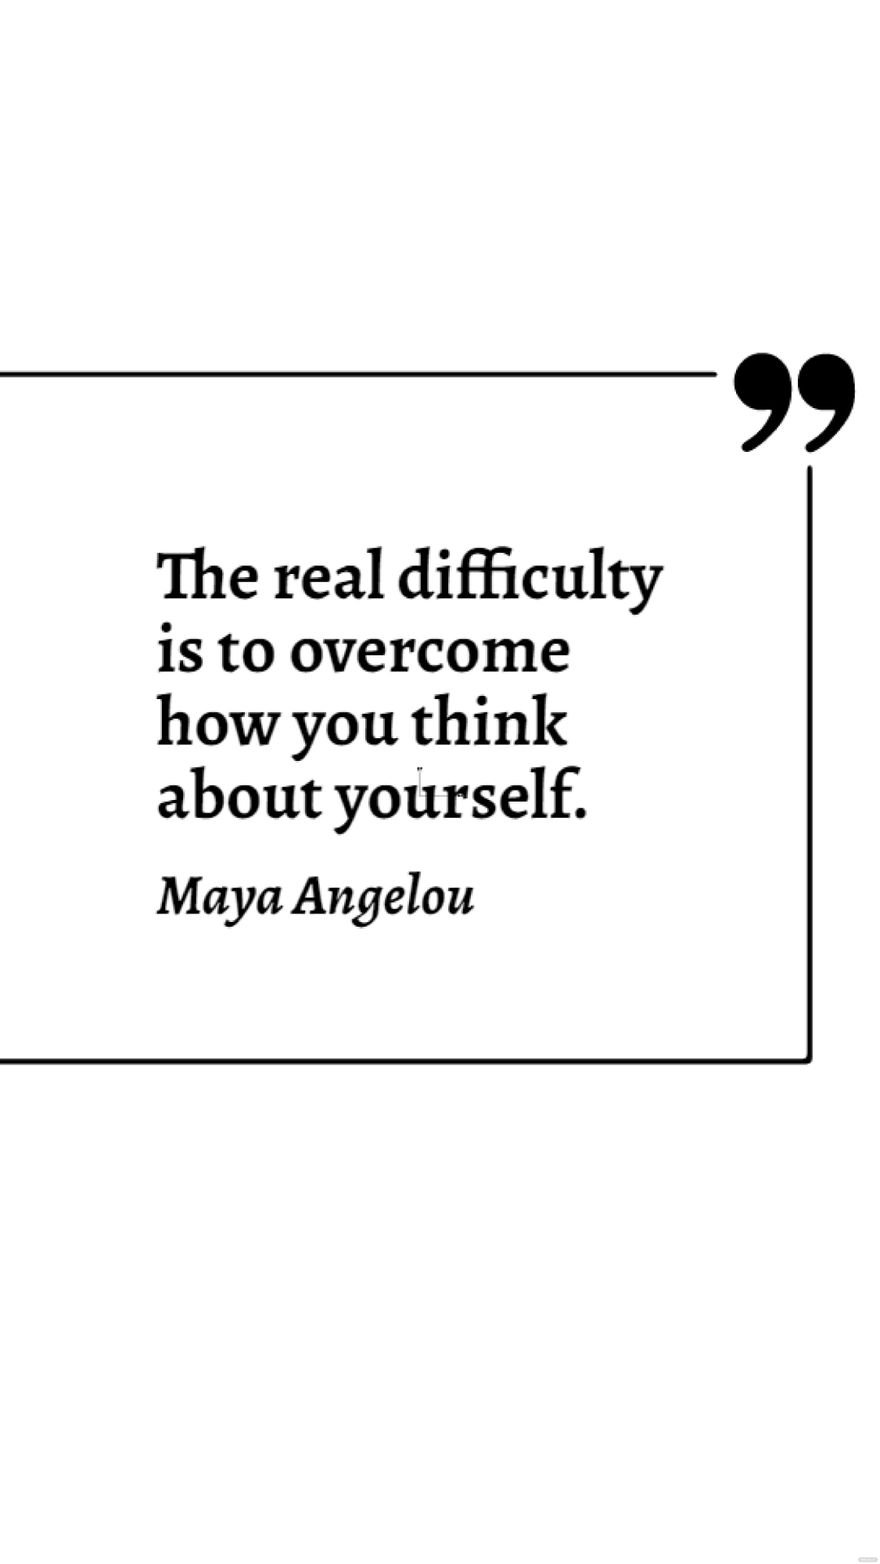 Free Maya Angelou - The real difficulty is to overcome how you think about yourself.